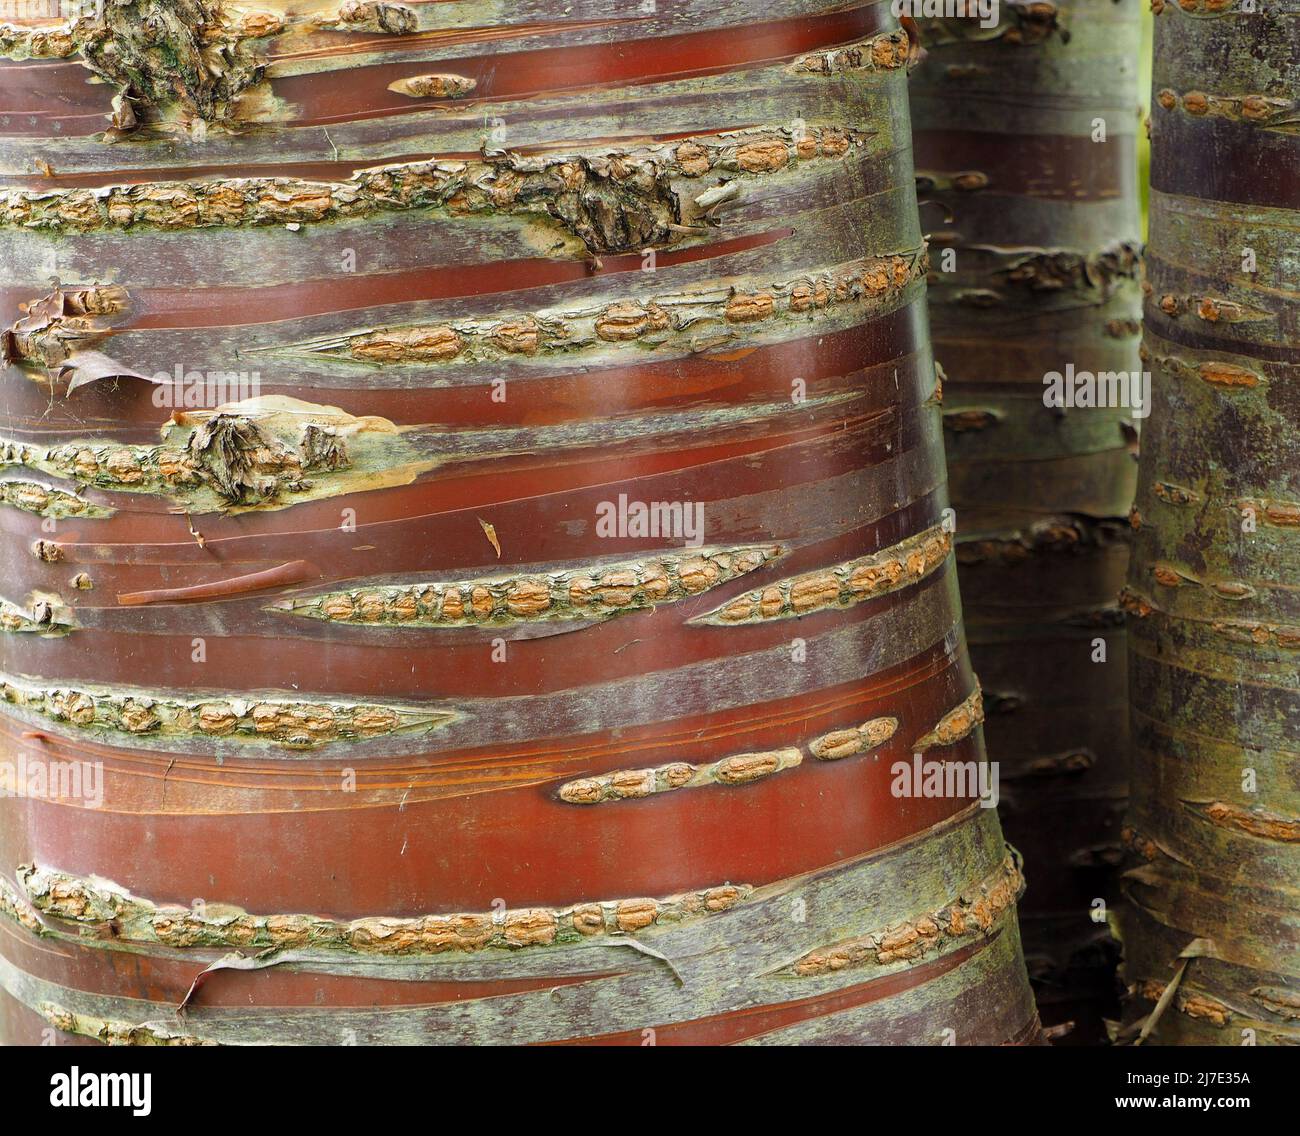 Trunk of a mature Prunus Serrula tree (Japanese or Tibetan cherry) showing its peeling bark and how the newly exposed red bark fades making stripes. Stock Photo